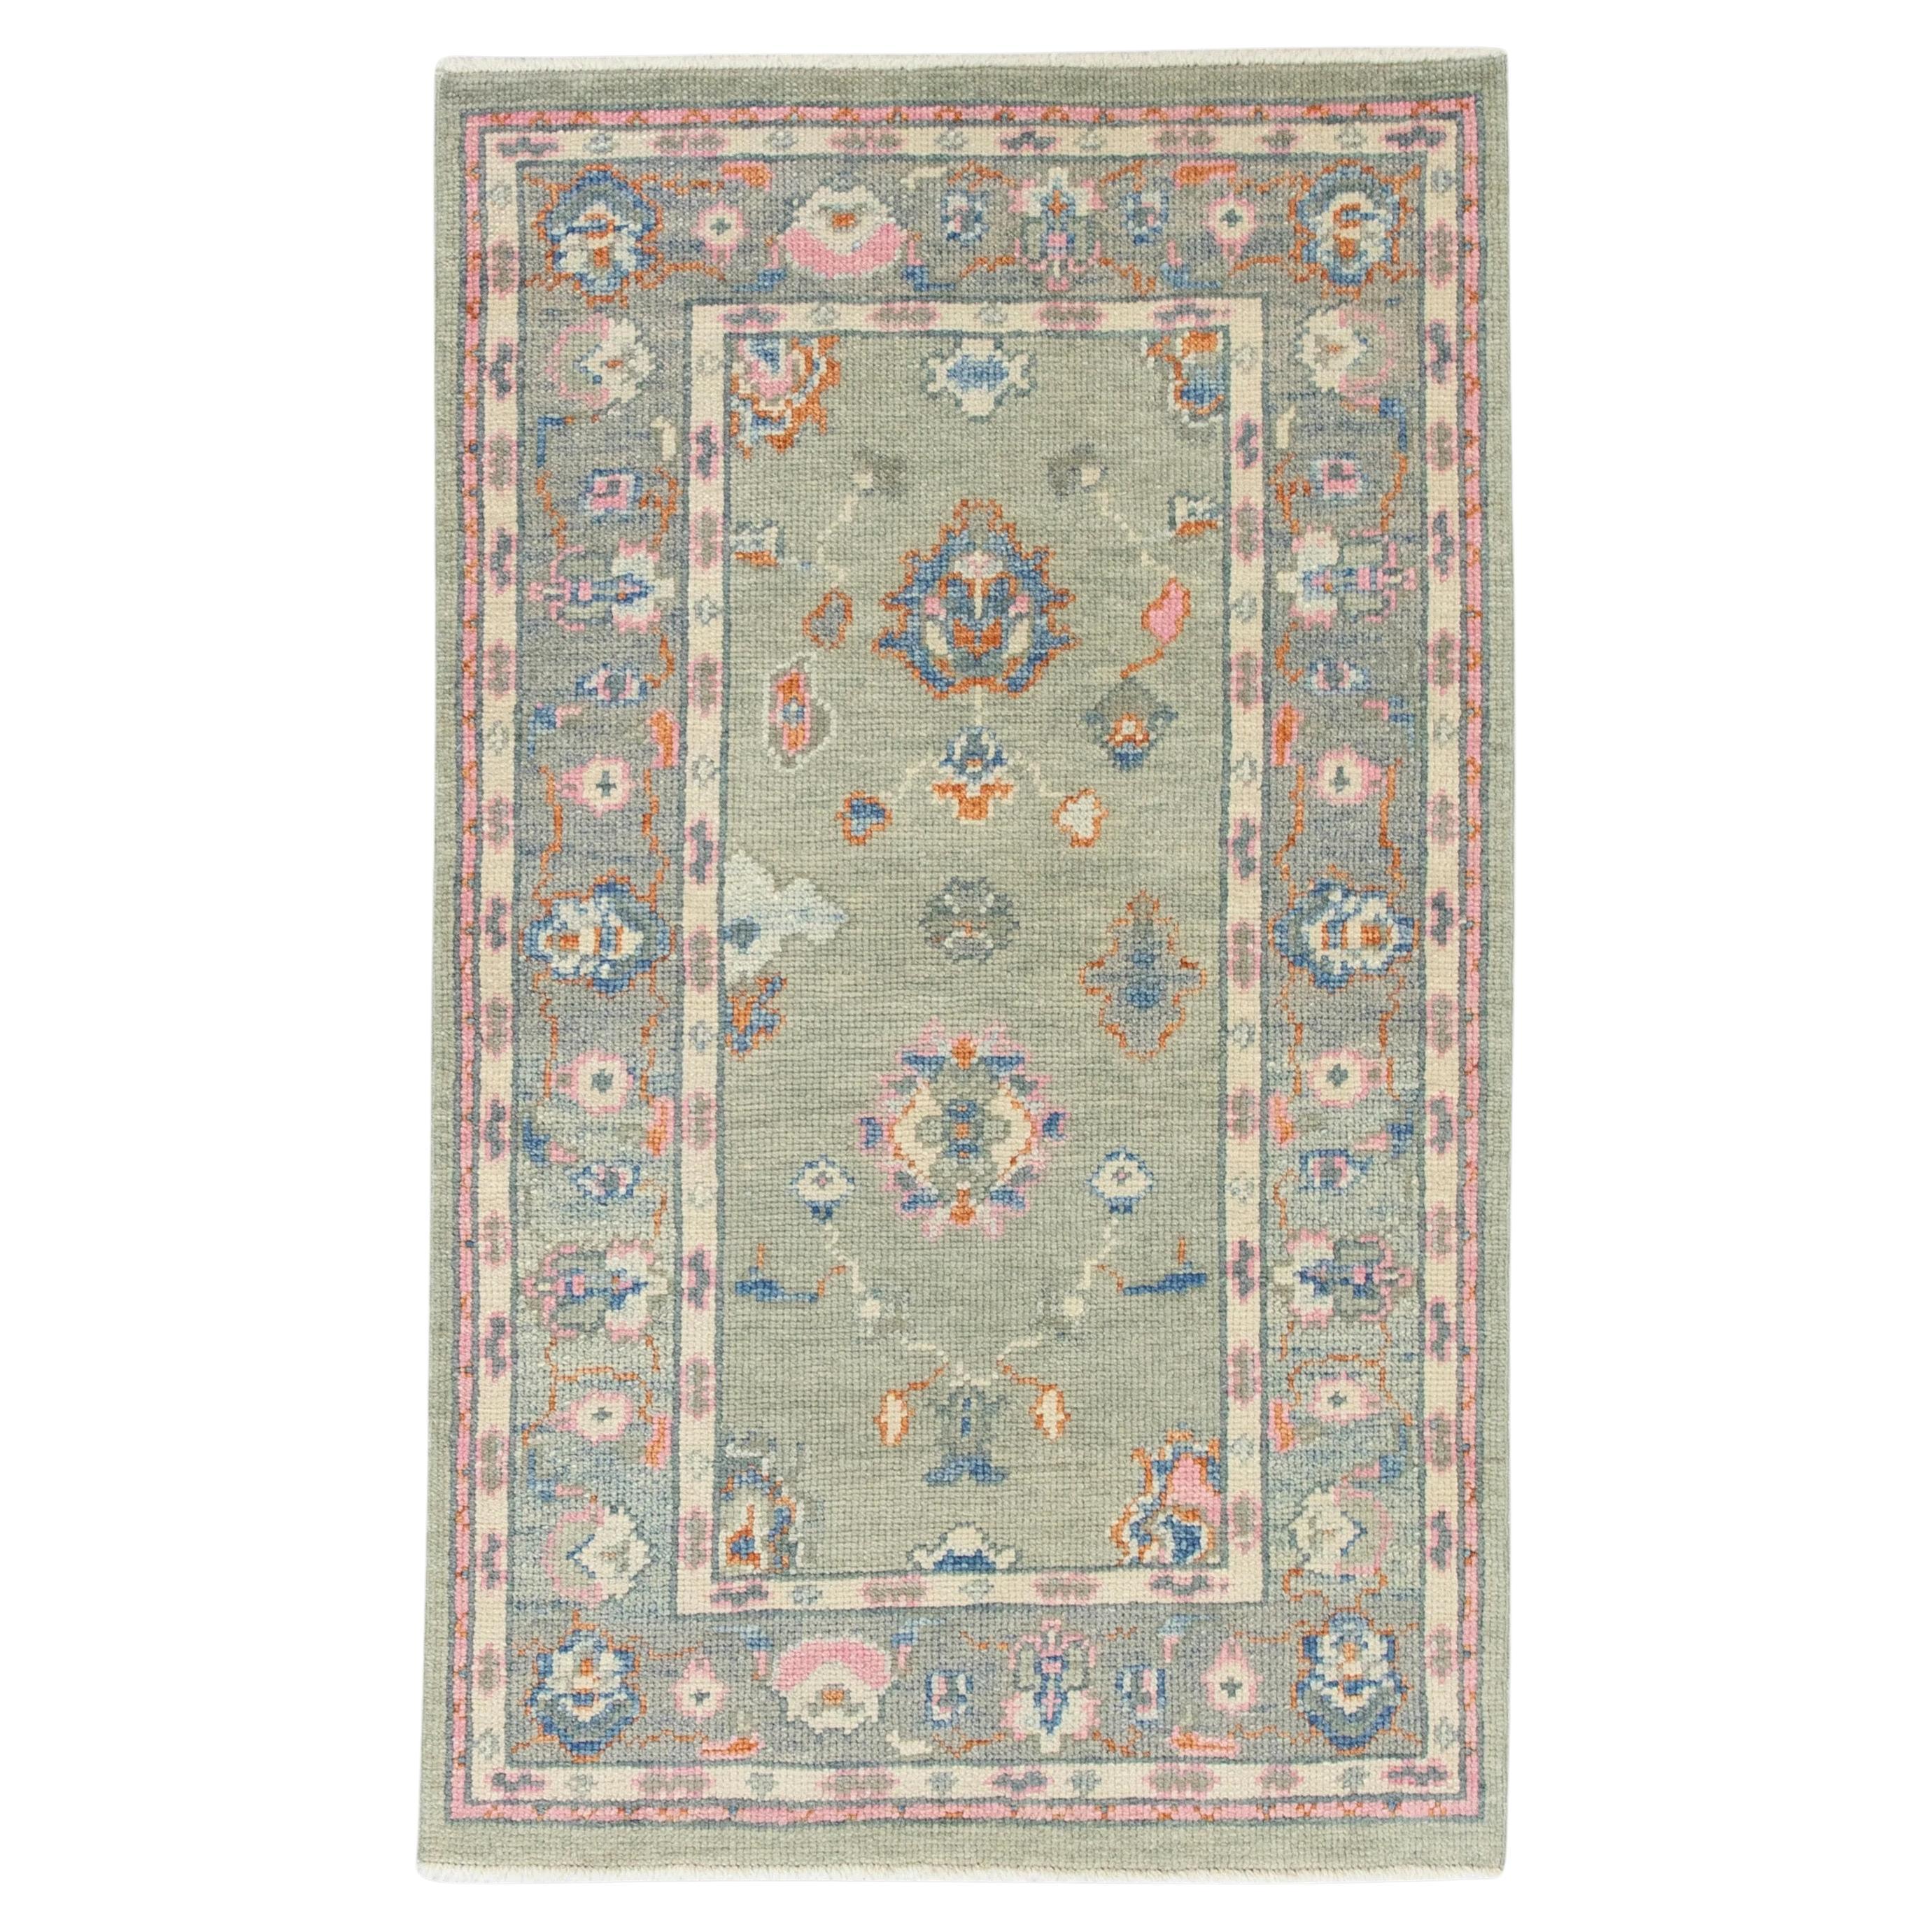 Green and Pink Floral Handwoven Wool Turkish Oushak Rug 2'11" x 4'11"